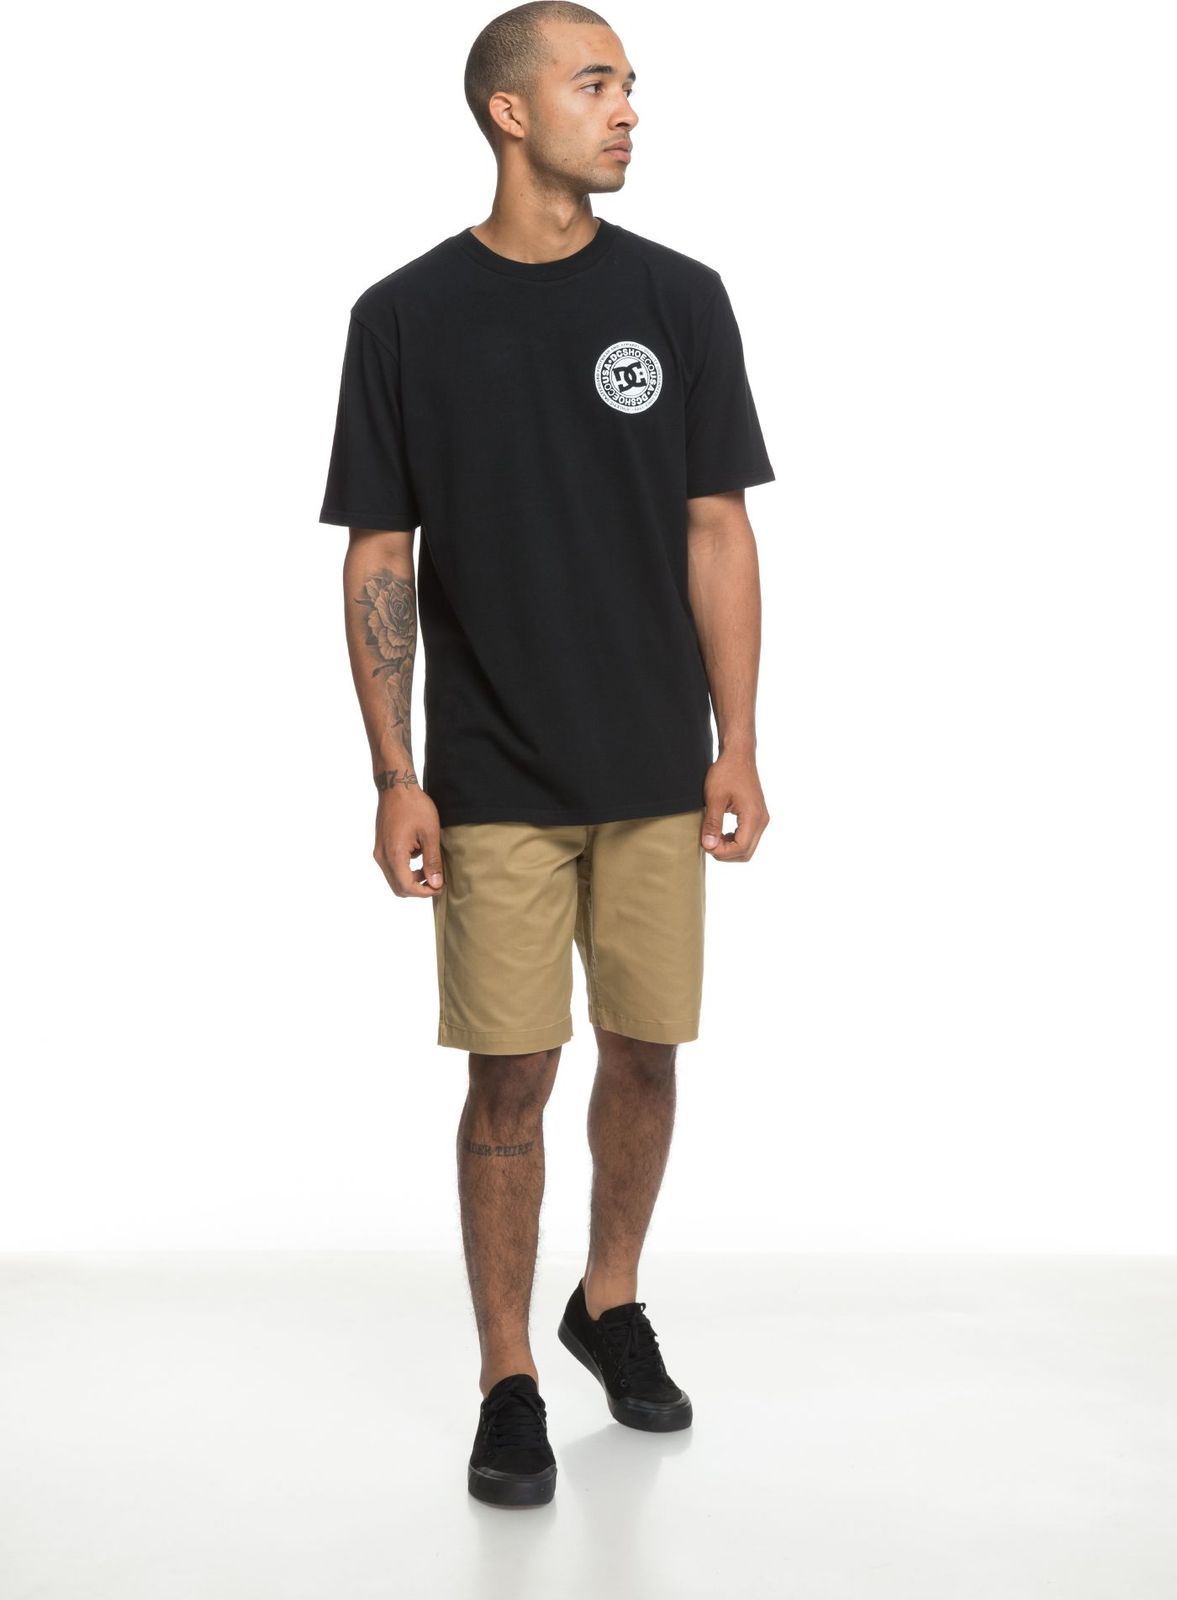   DC Shoes Worker Straight, : . EDYWS03111-CLM0.  38 (54)